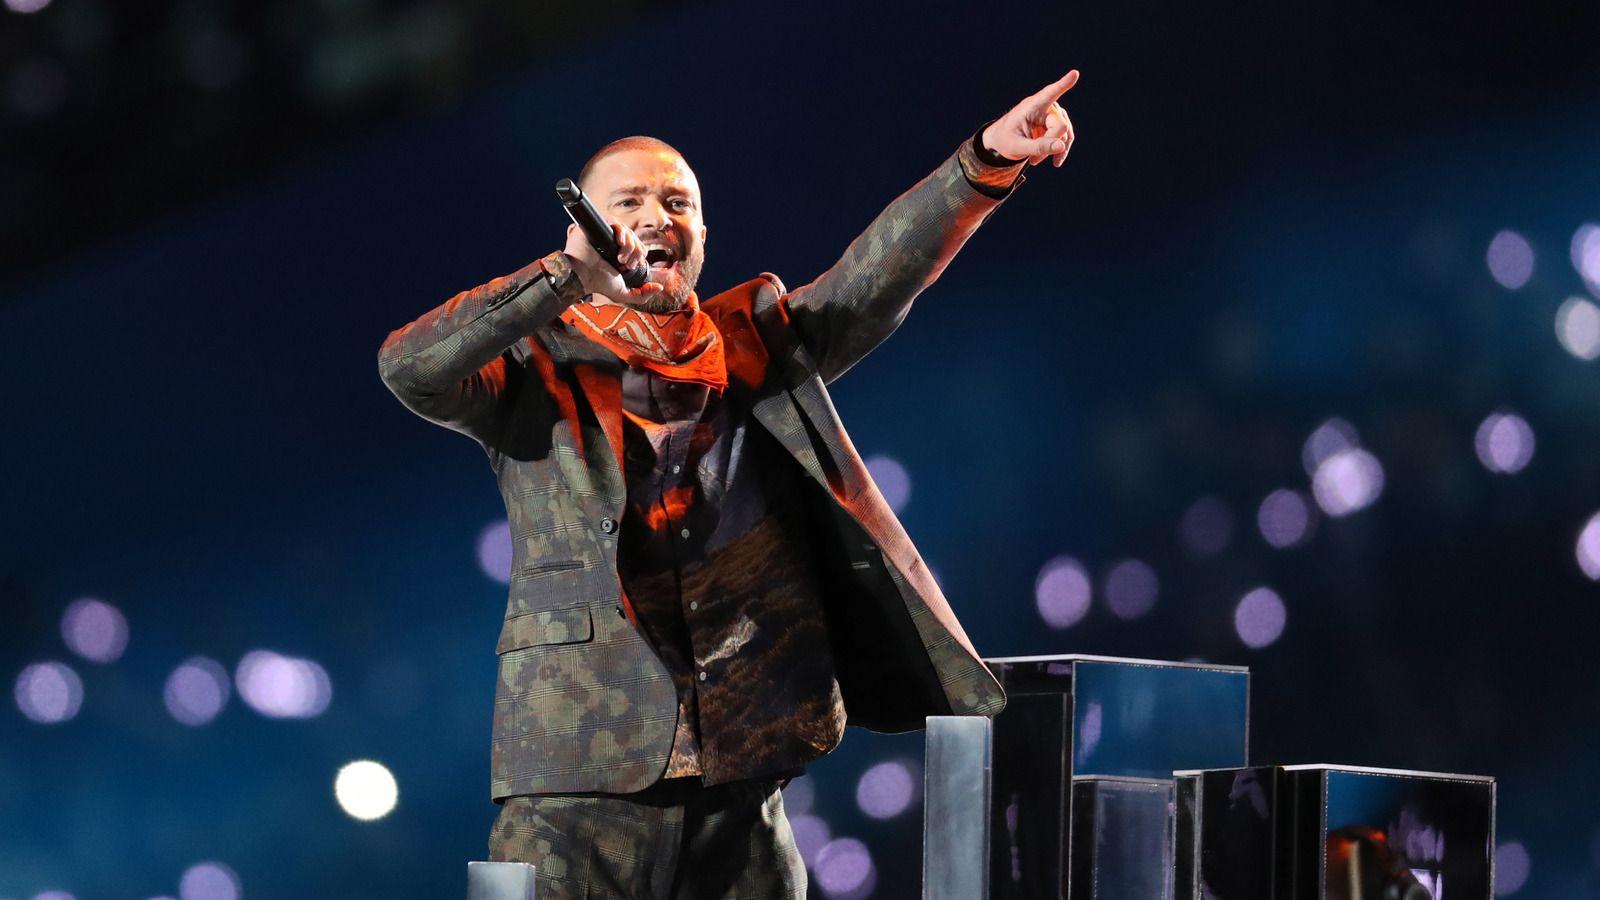 Watch Justin Timberlake's entire halftime performance